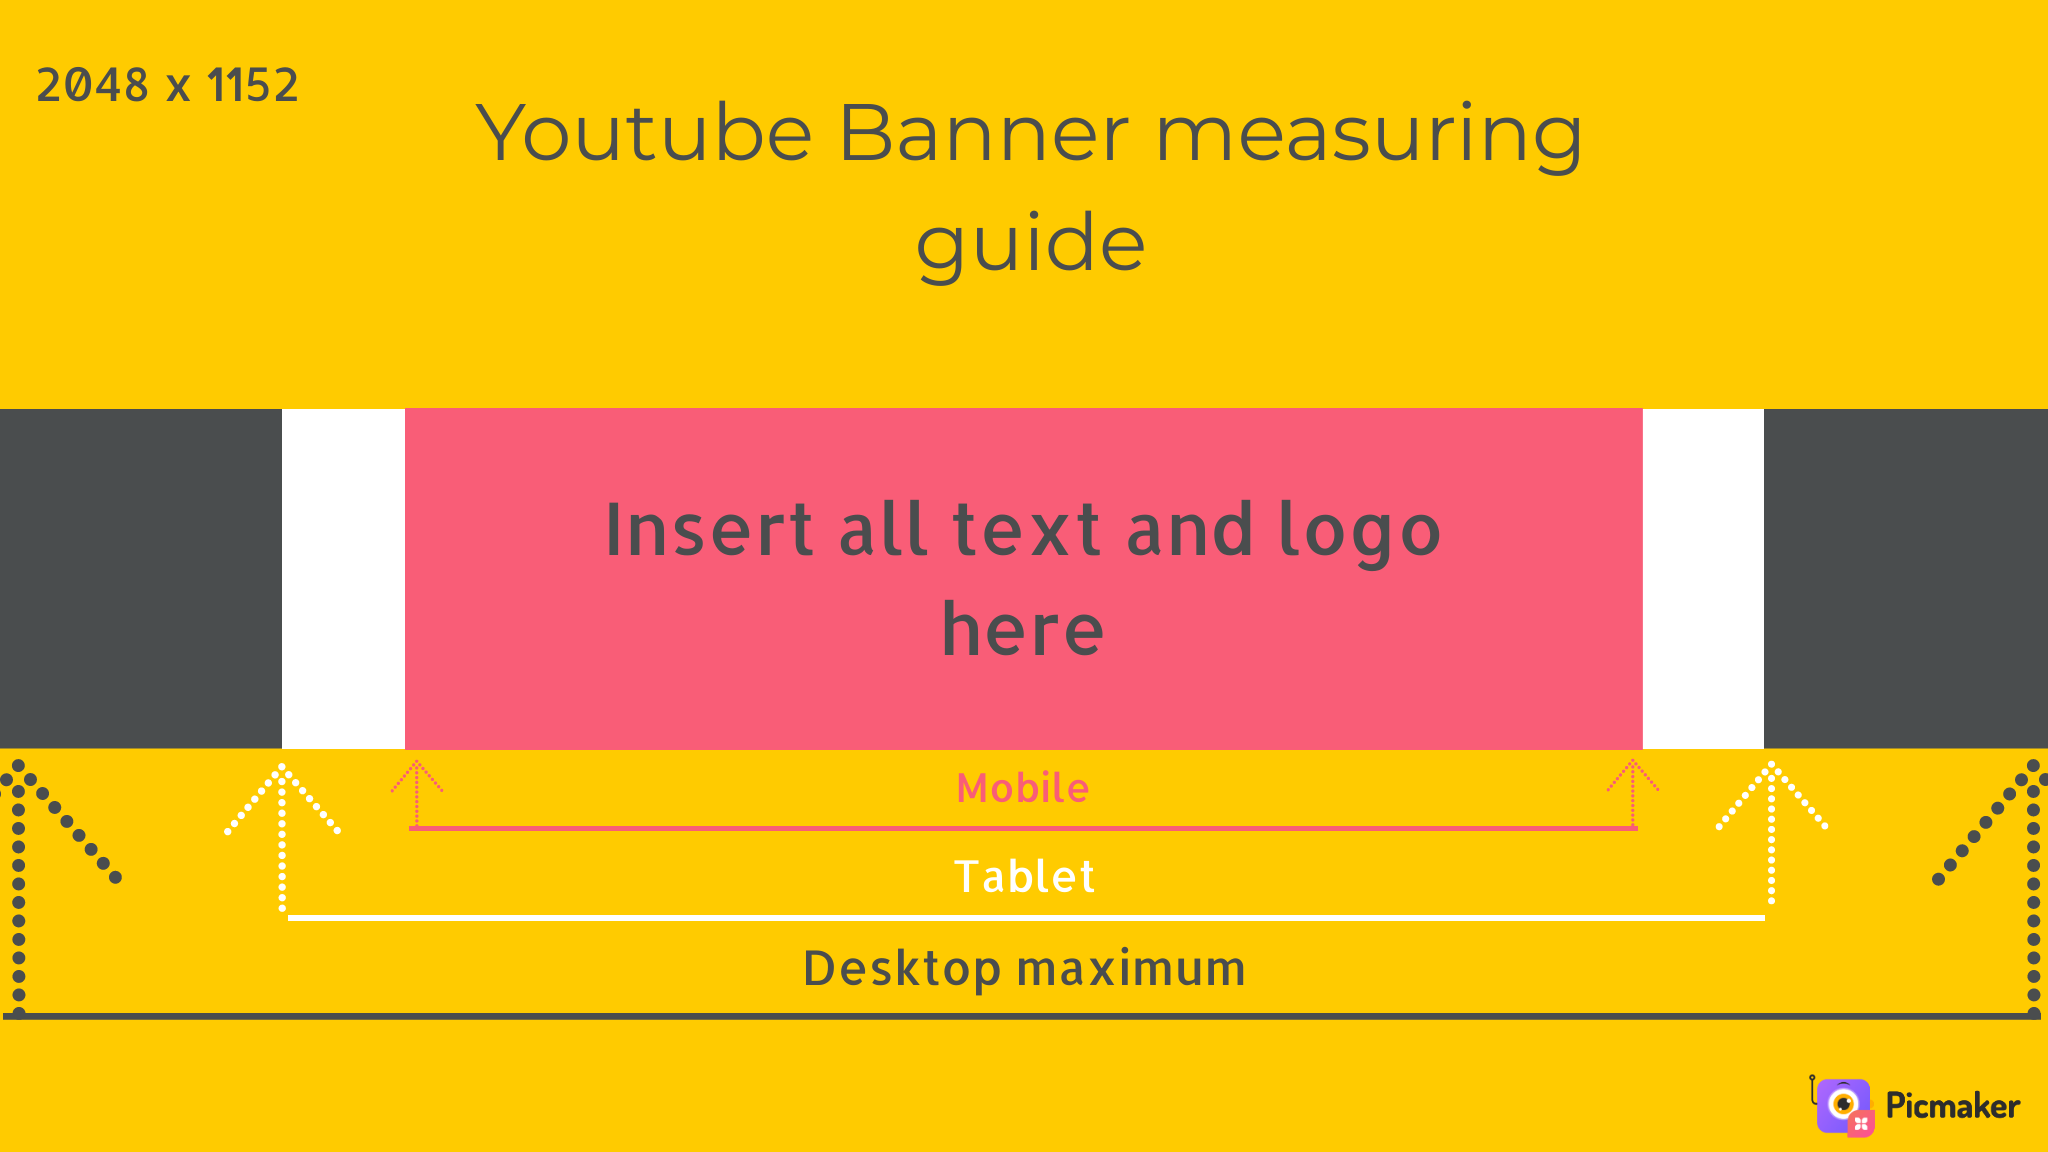 YouTube banner 2048x1152 measuring guide - Picmaker - 1